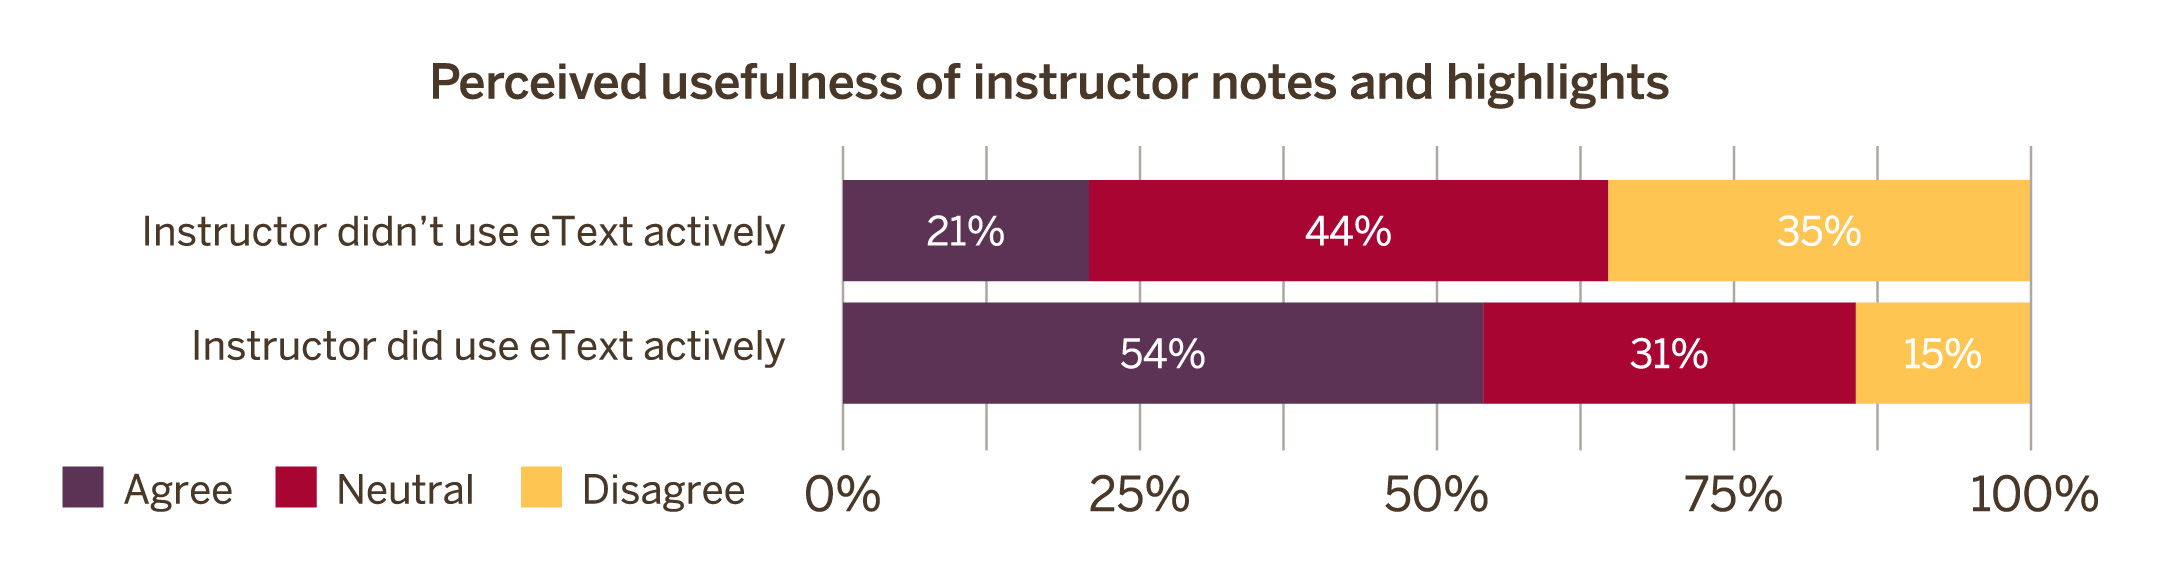 Perceived usefulness of instructor notes and highlights